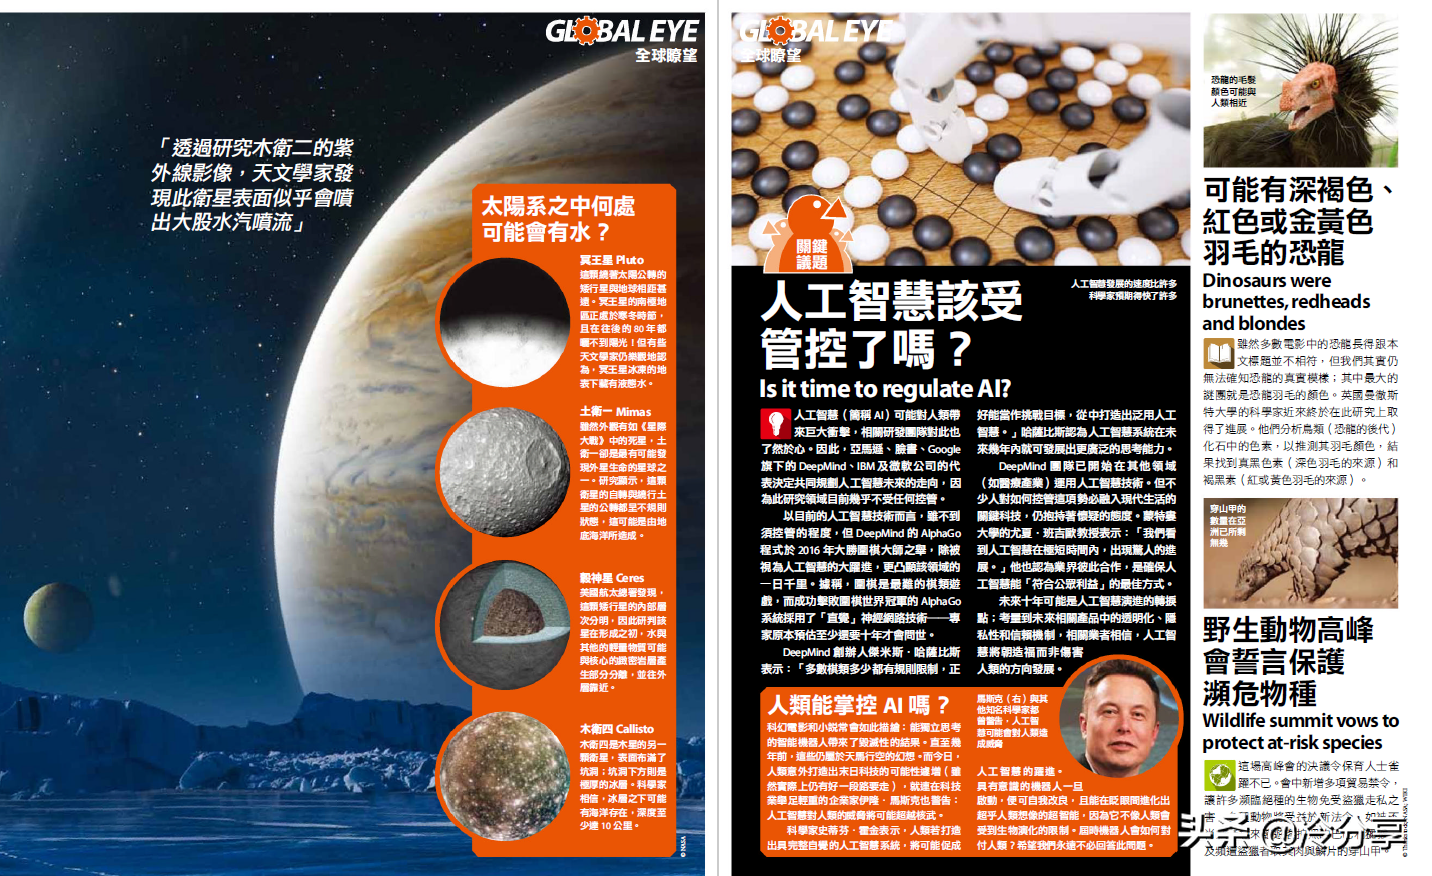 "Popular Science Education" "All Things" Hong Kong and Taiwan Color Traditional Chinese Free Download - Comprehensive Knowledge 8